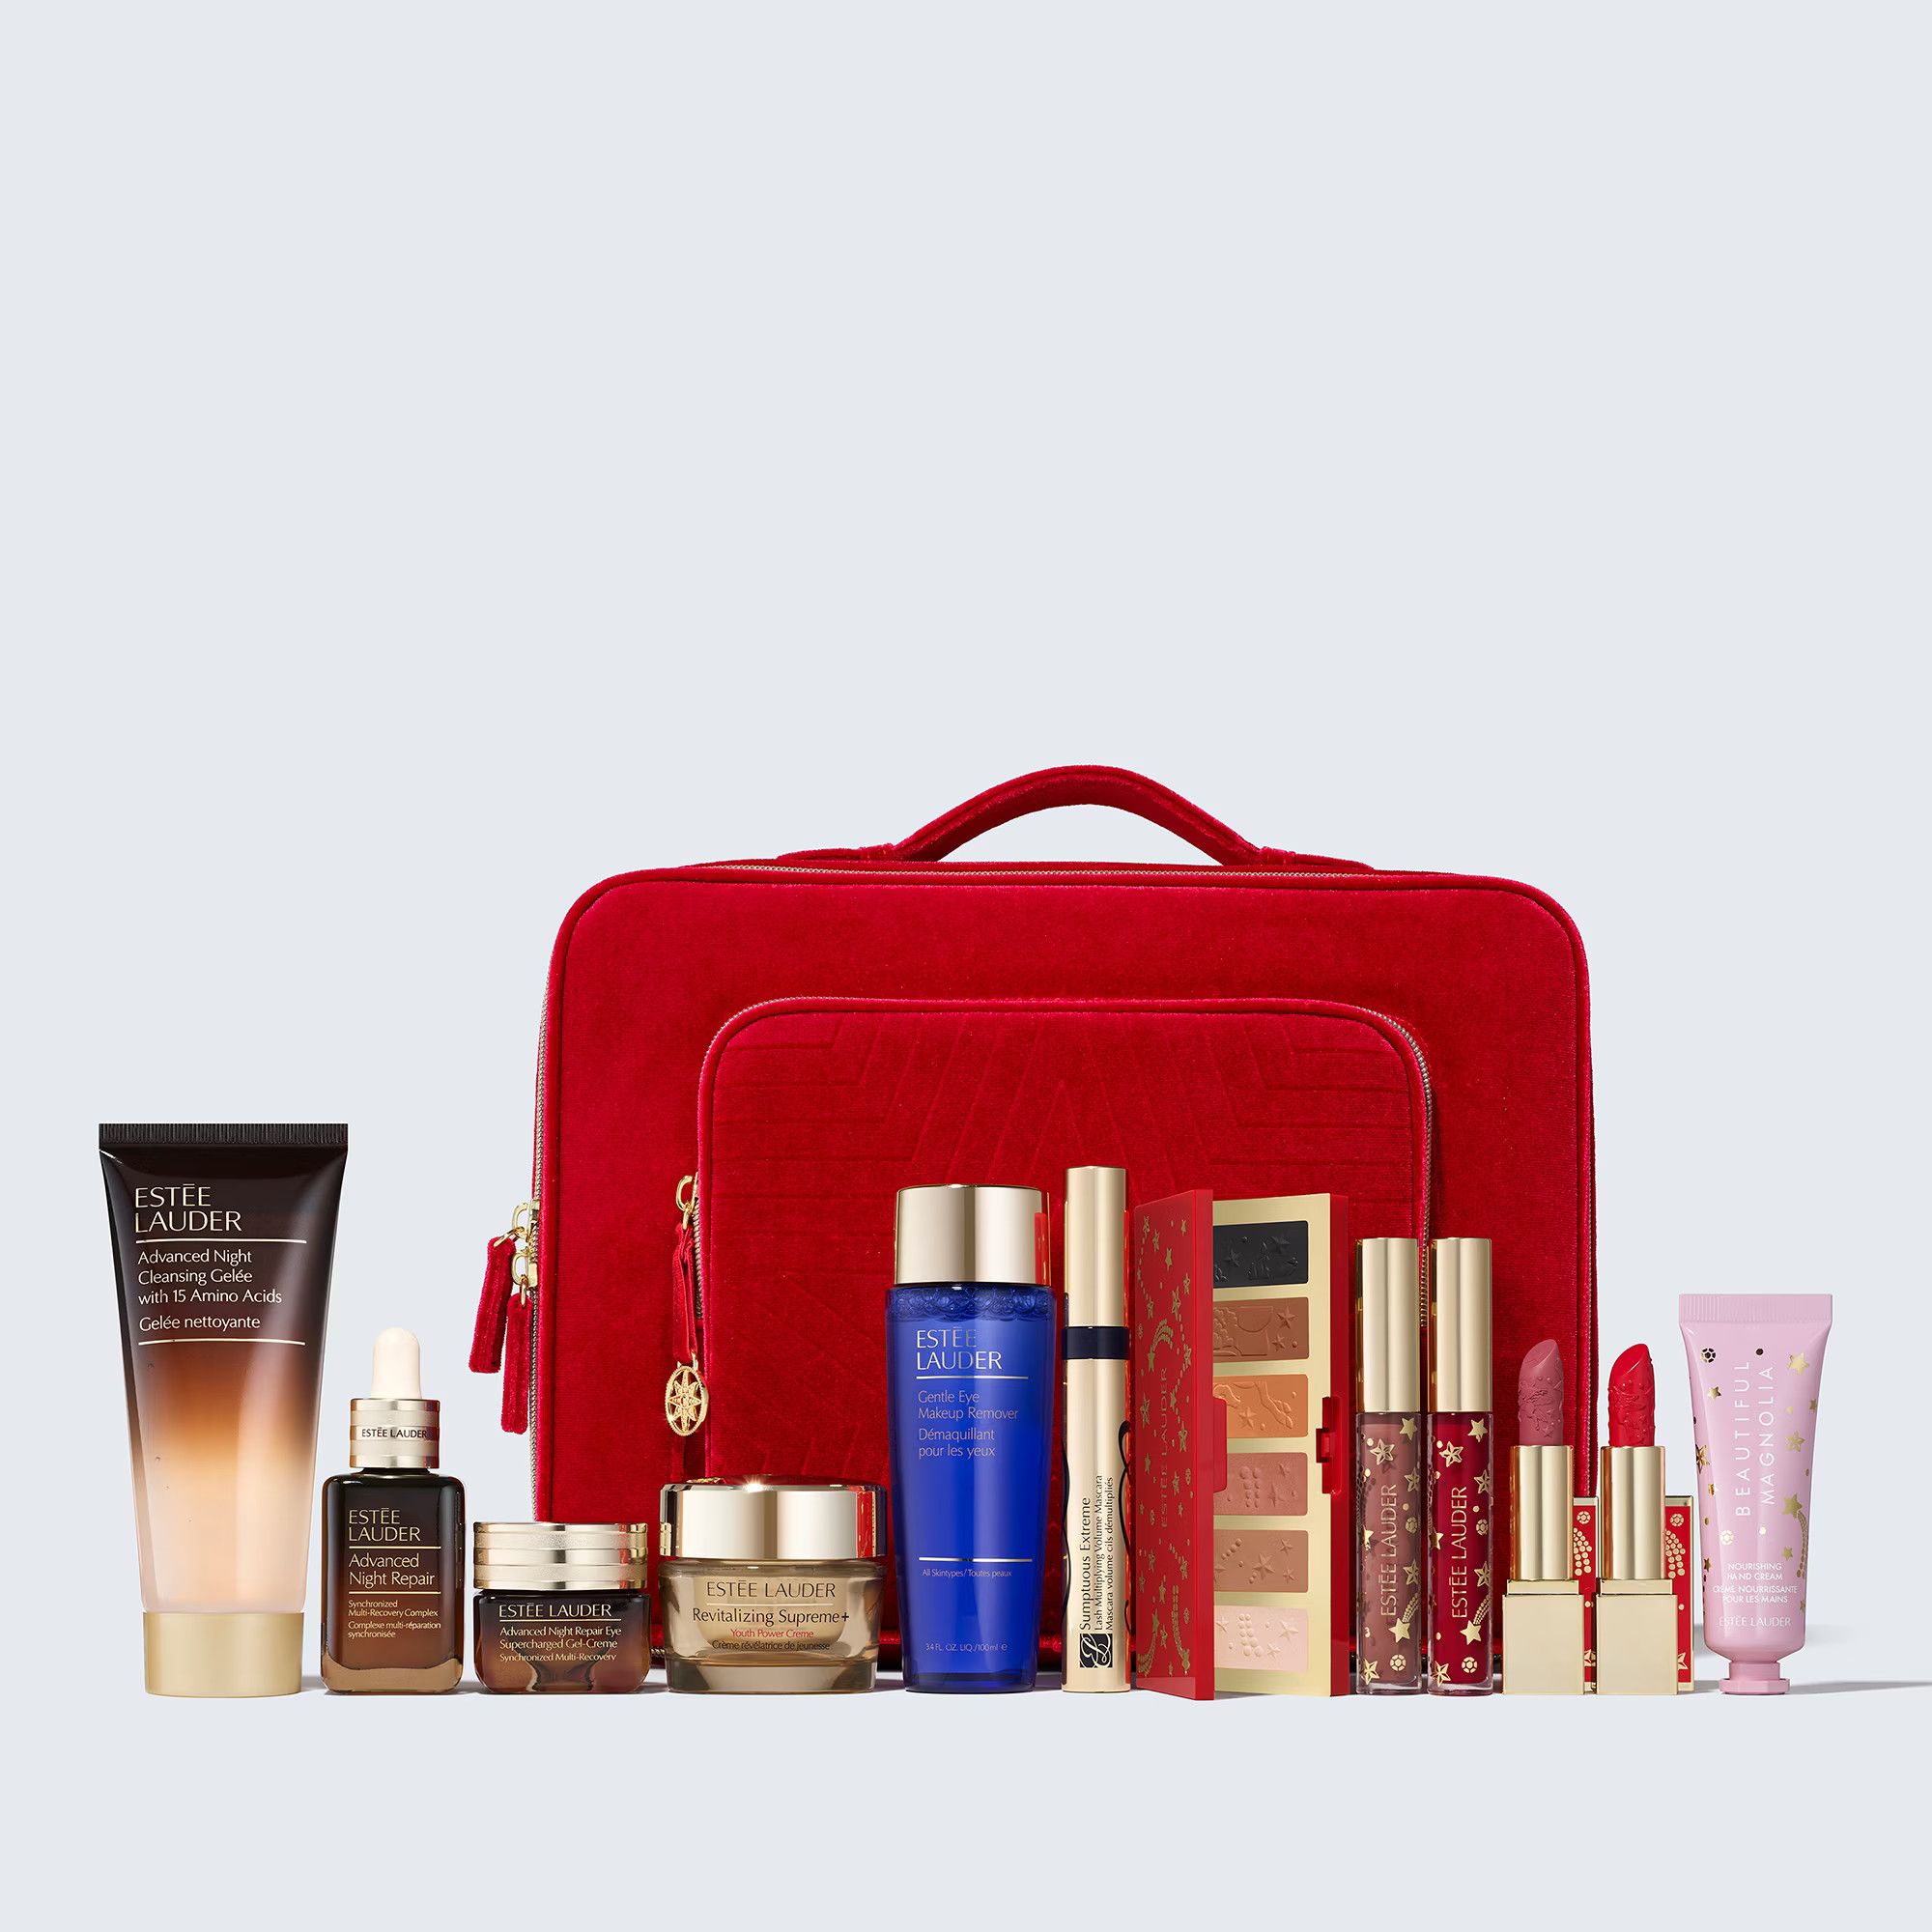 4.5(48)Read ReviewsWrite a Review92% of reviewers recommend this product | Estee Lauder (US)